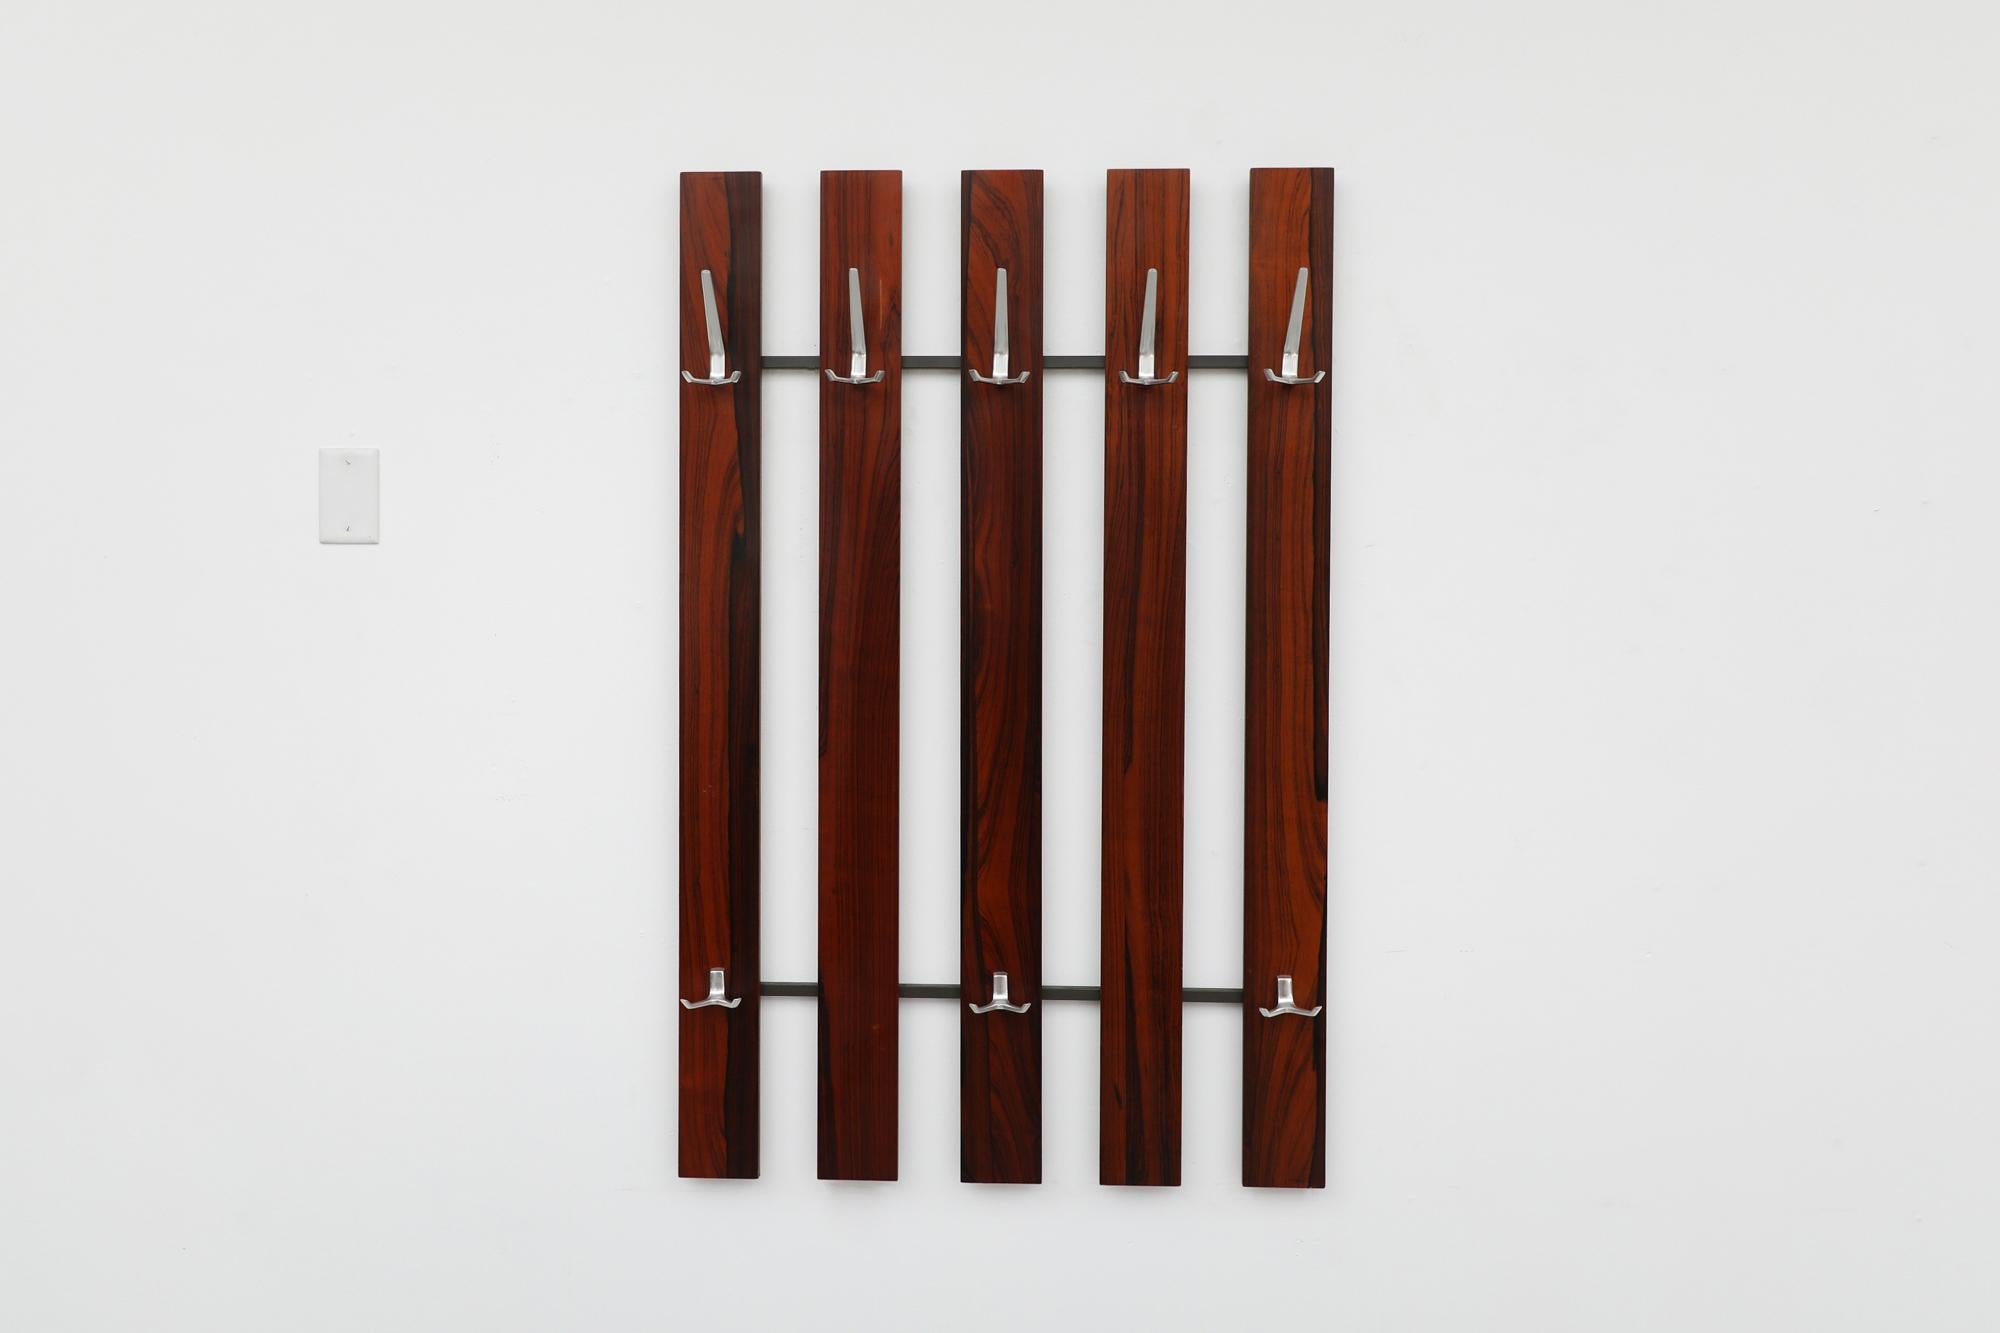 Mid-Century Rosewood wall mounted coat rack with long striped woodgrain pattern on 5 section slats and 8 cast aluminum hooks. In original condition with minimal wear and scratching. Similar coat racks also available and listed separately.